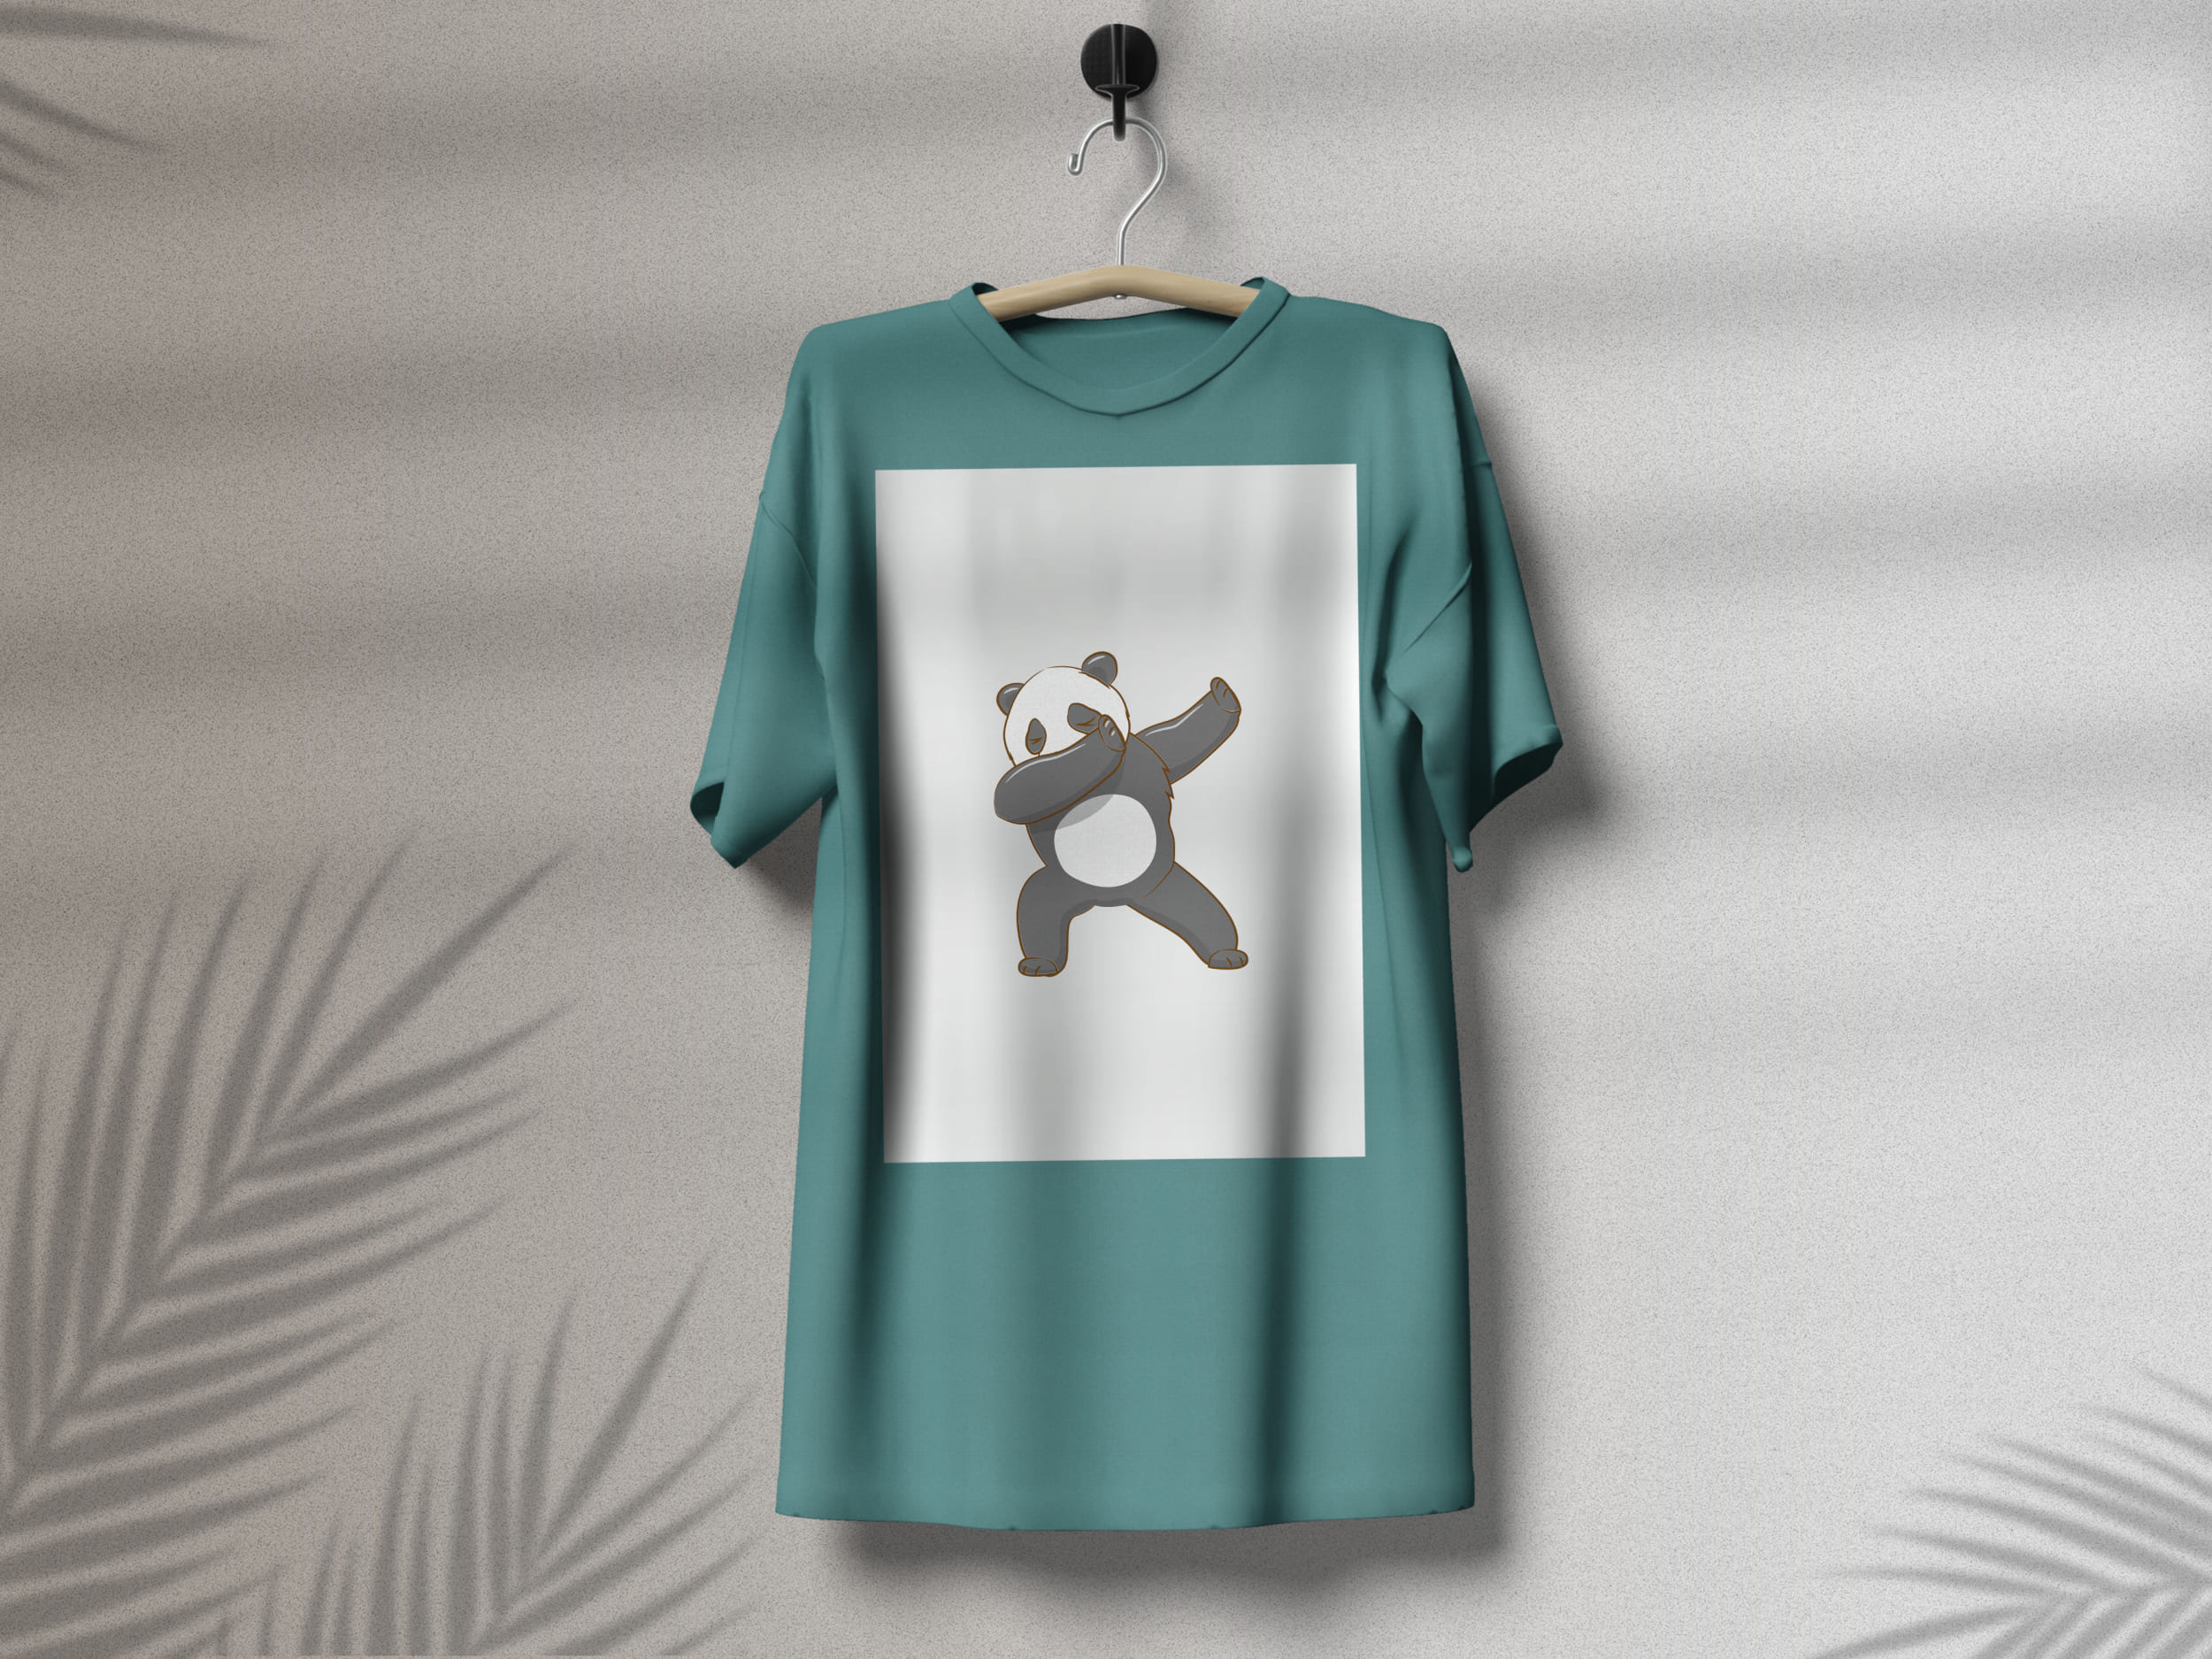 Turquoise t-shirt with a dancing panda on a white background, on a hanger on a gray background